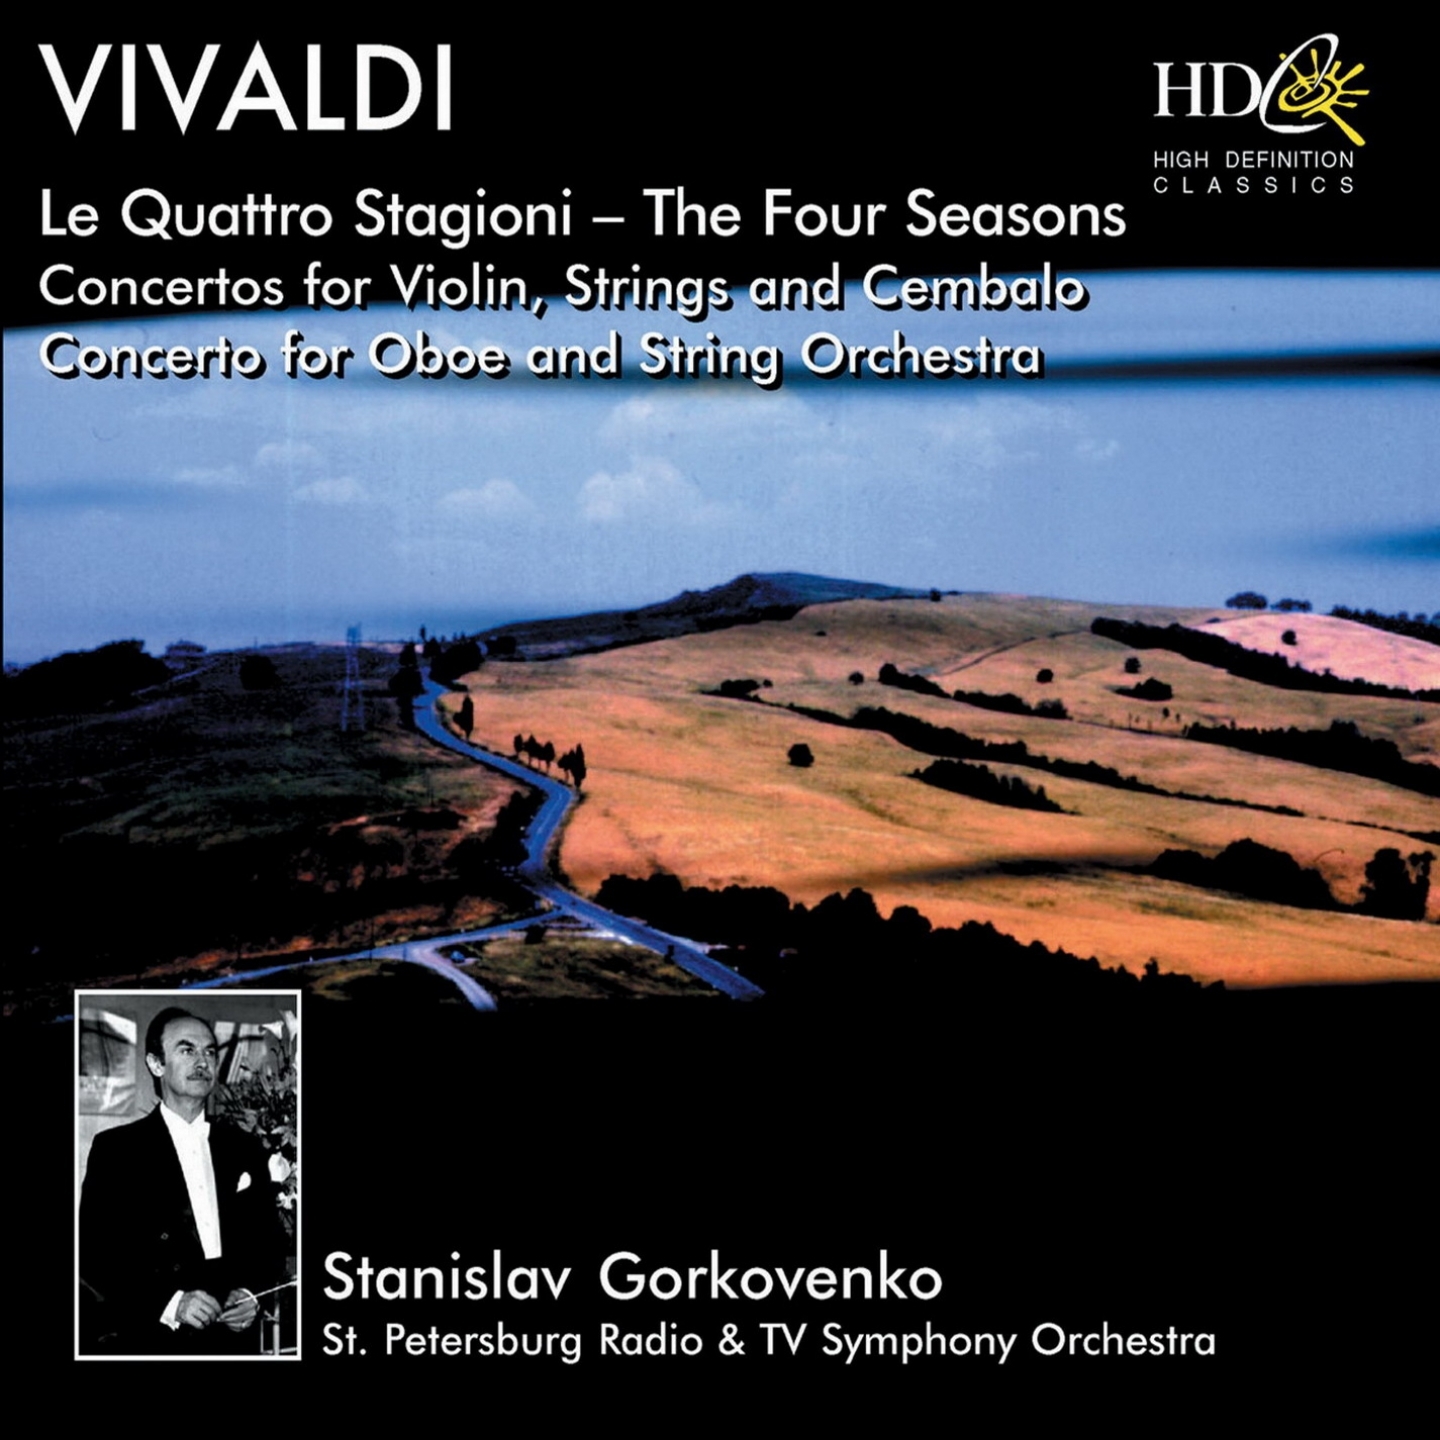 Le Quattro Stagioni (The Four Seasons), Concertos for Violin, Strings and Cembalo, Op.8; Concerto for Oboe and String Orchestra in A Minor